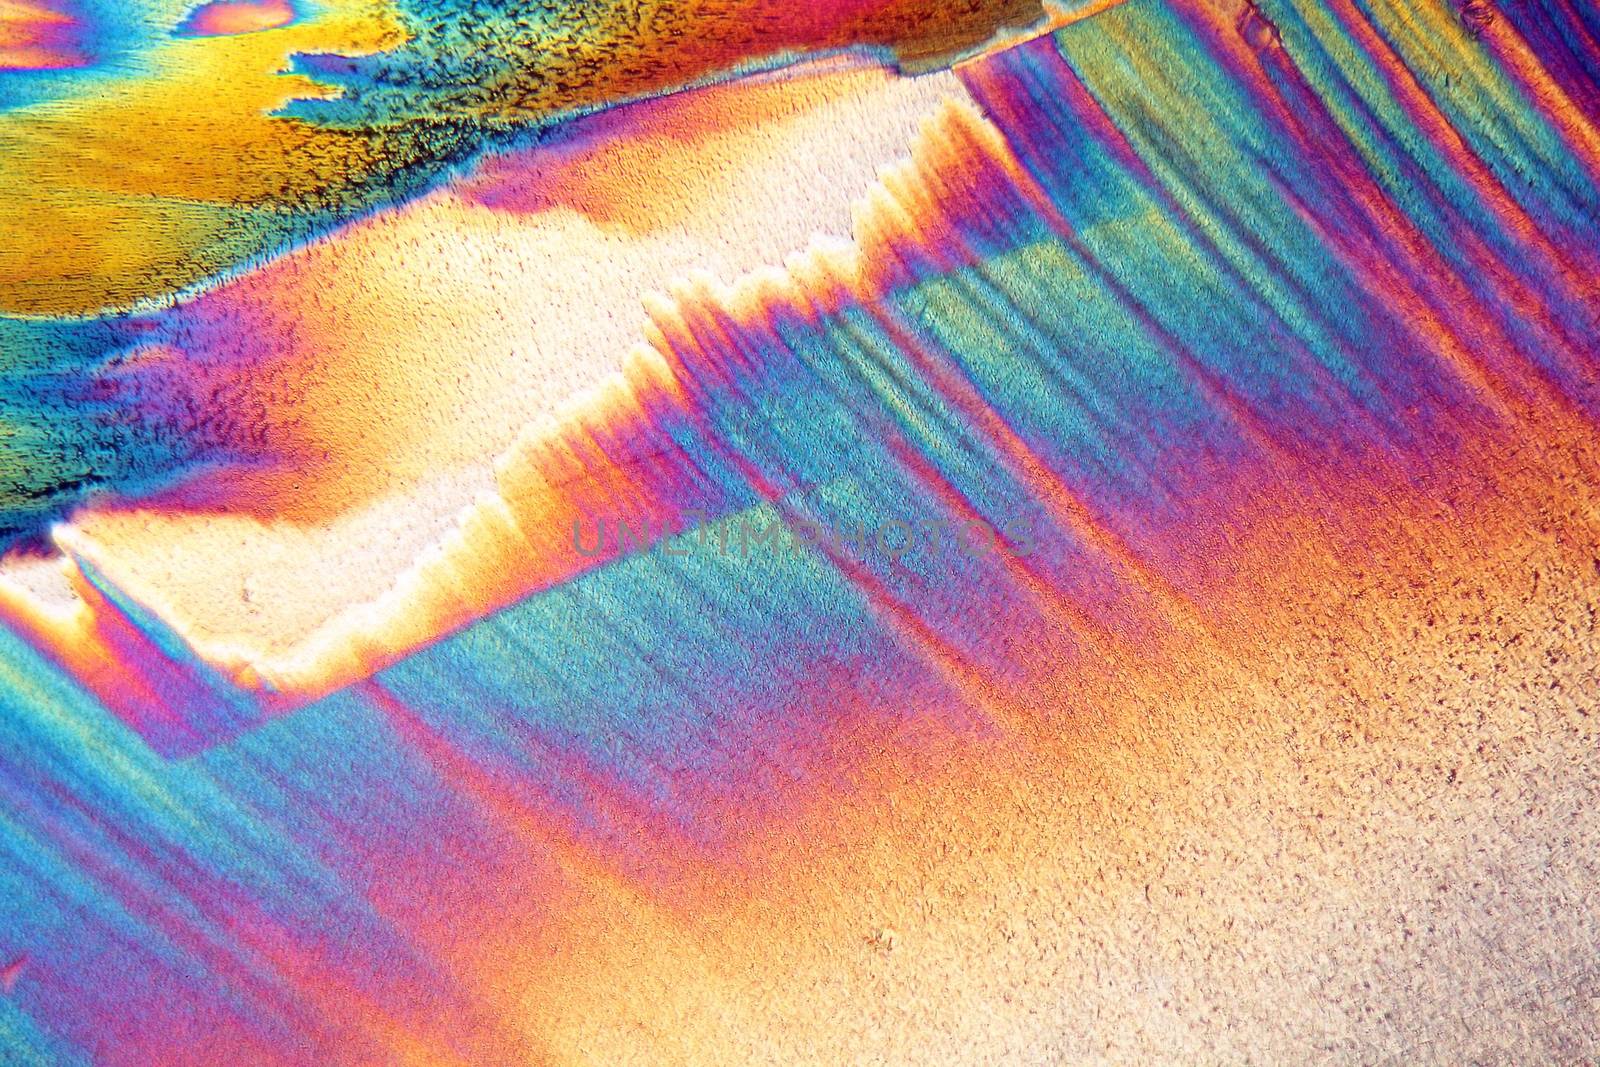 Cystein is a semi-essential amino acid which occurs in the human body. The photo is made with a magnification of 100x and in polarized light. The sample is pure Cystein chloride precipitated from a solution on a microscope slide.